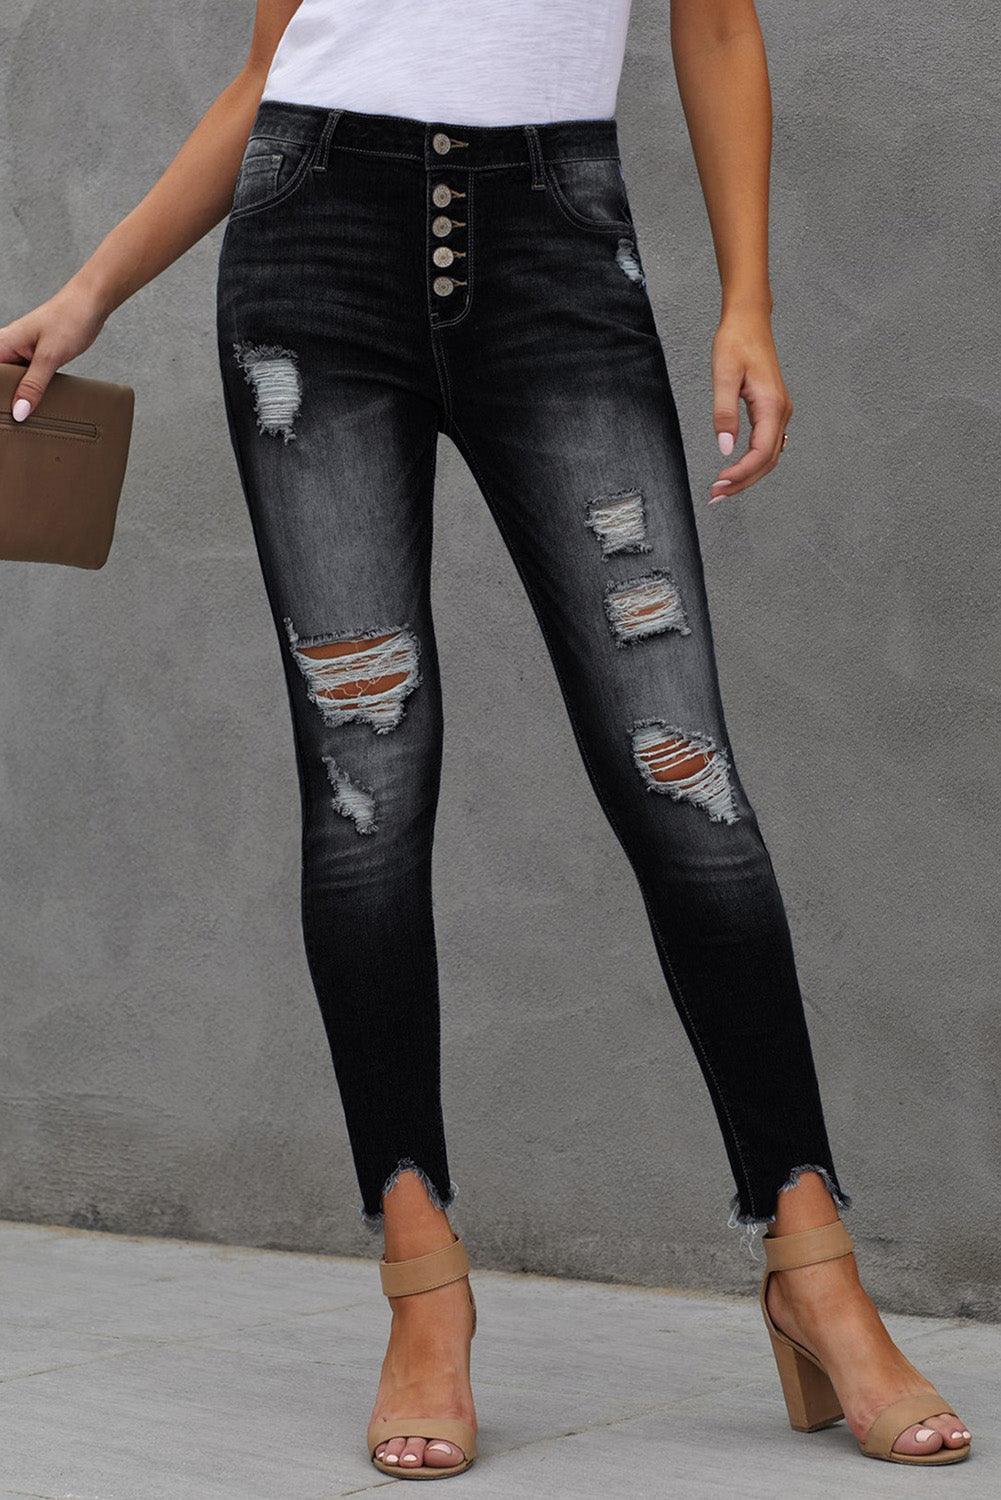 Weekend Style Button Fly High Waist Skinny Jeans - MXSTUDIO.COM